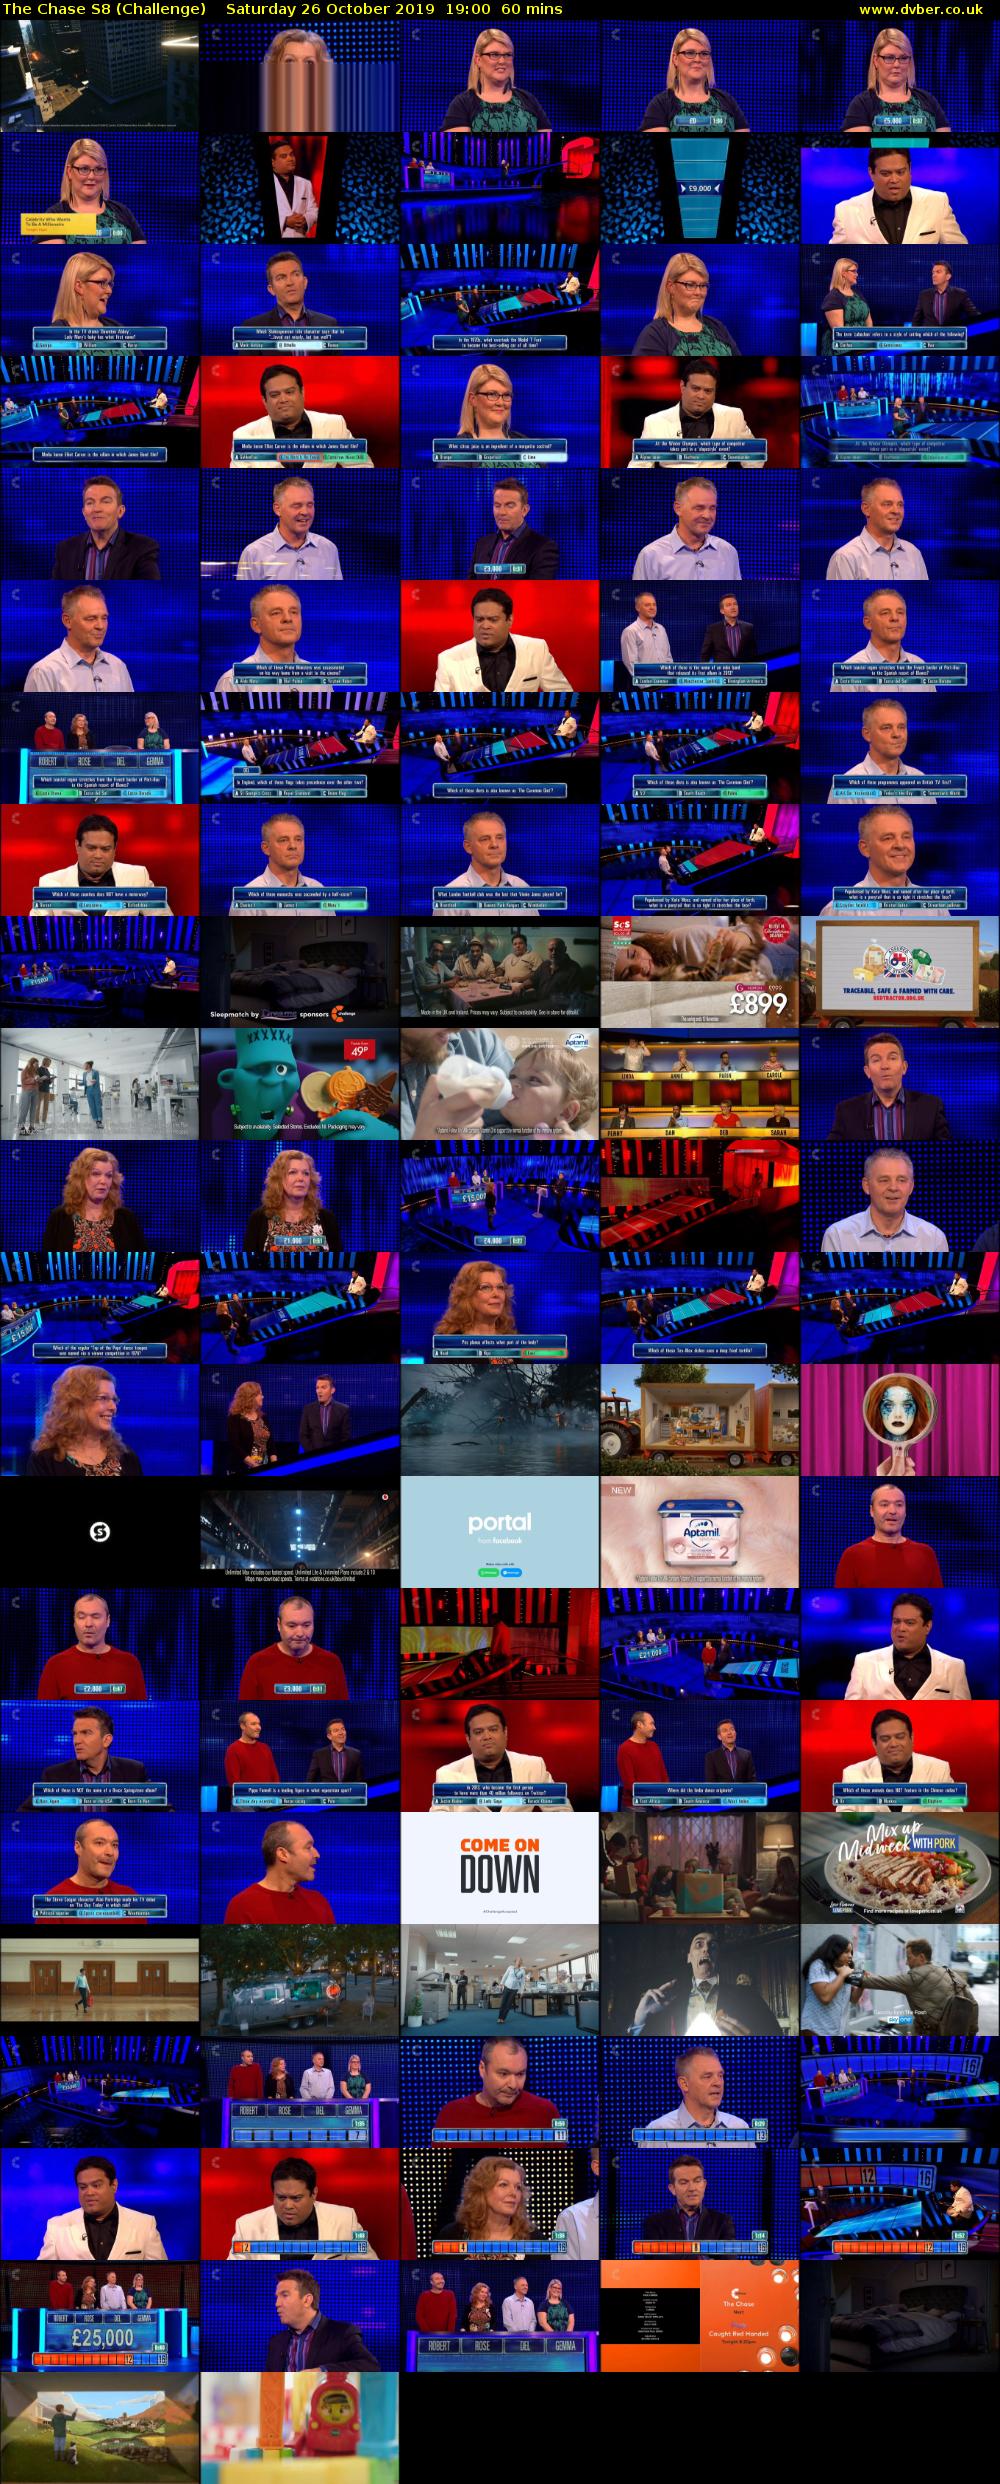 The Chase S8 (Challenge) Saturday 26 October 2019 19:00 - 20:00